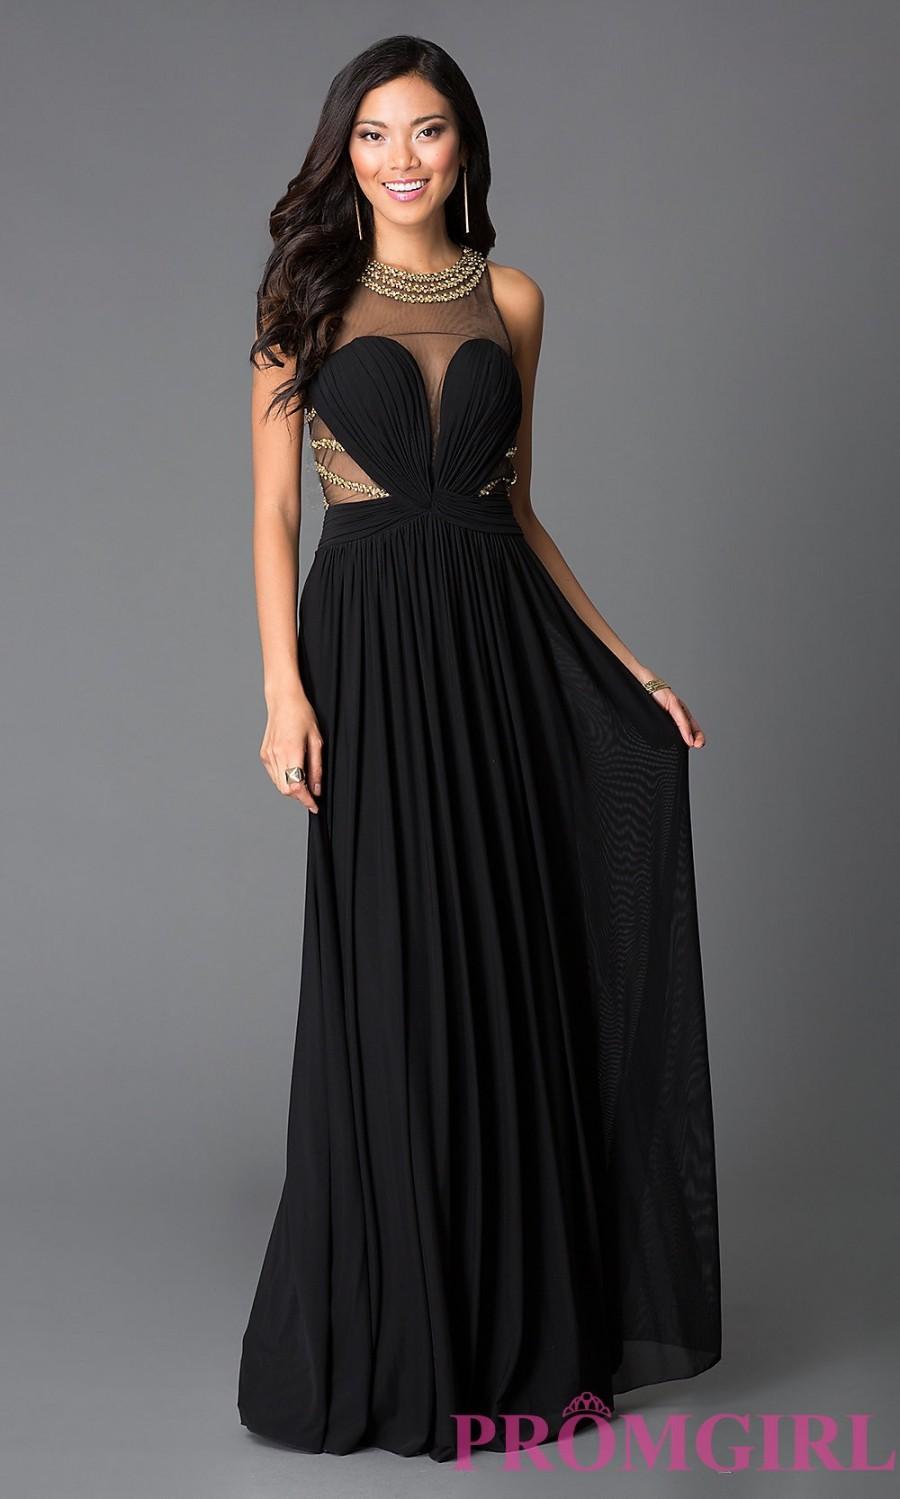 Long Prom Dress From JVN By Jovani With Illusion Neckline - Brand Prom ...